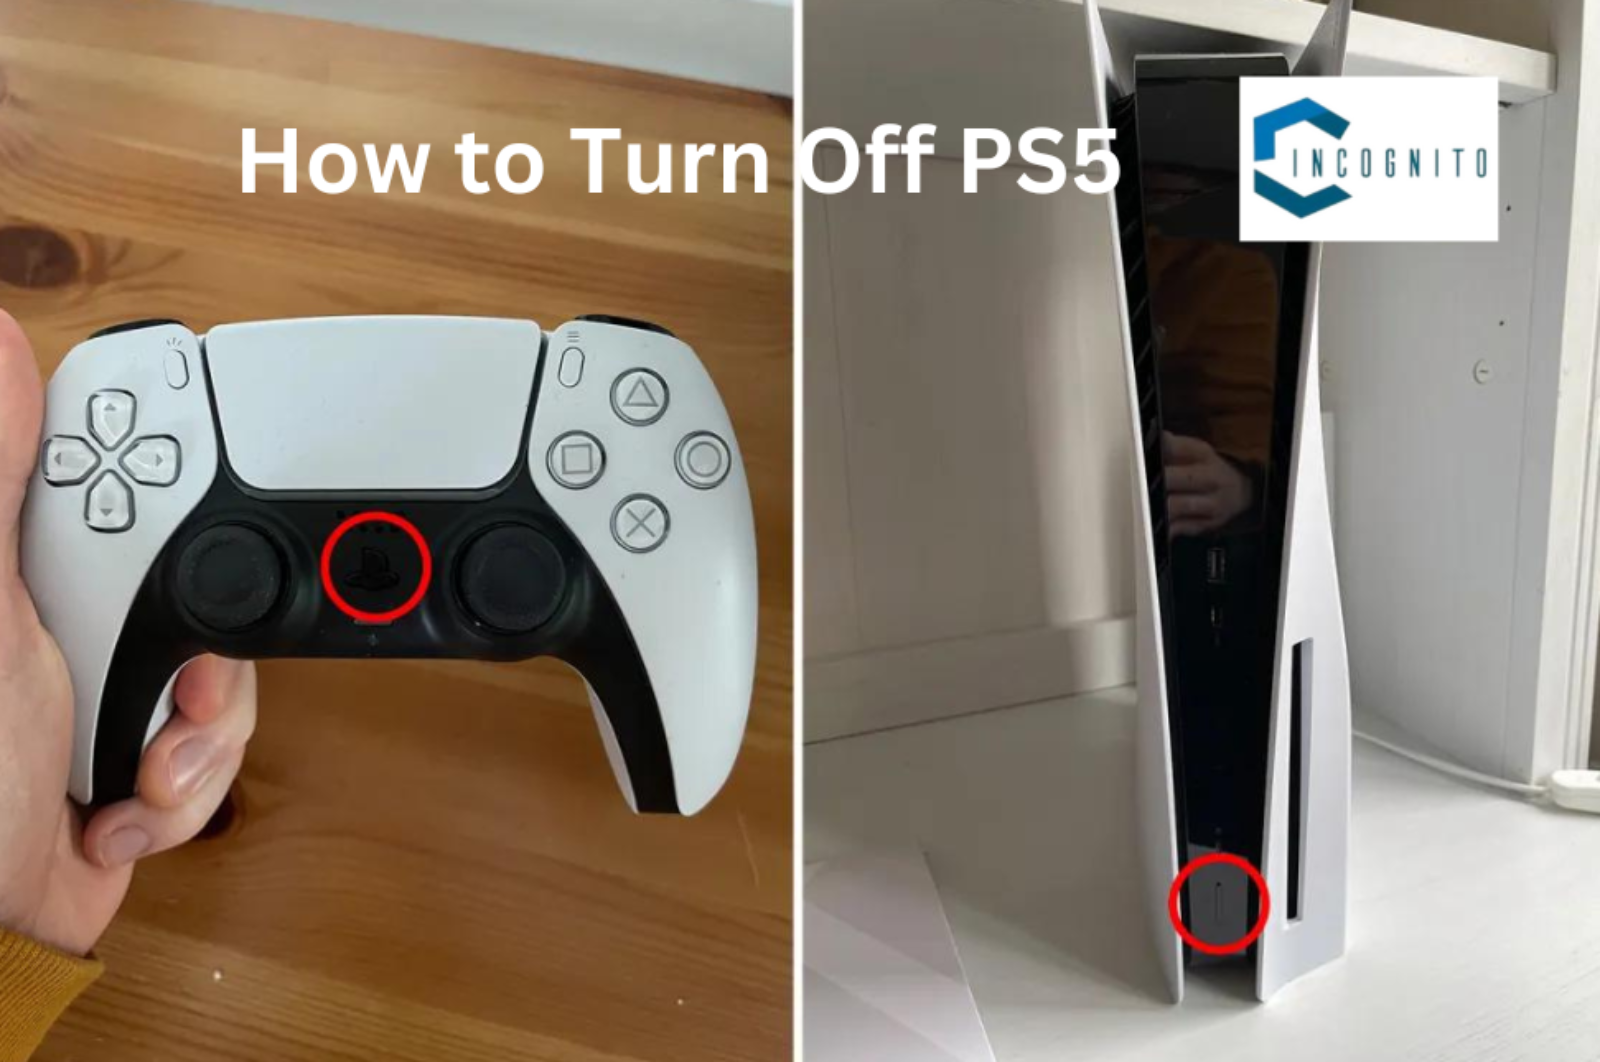 How to Turn off PS5